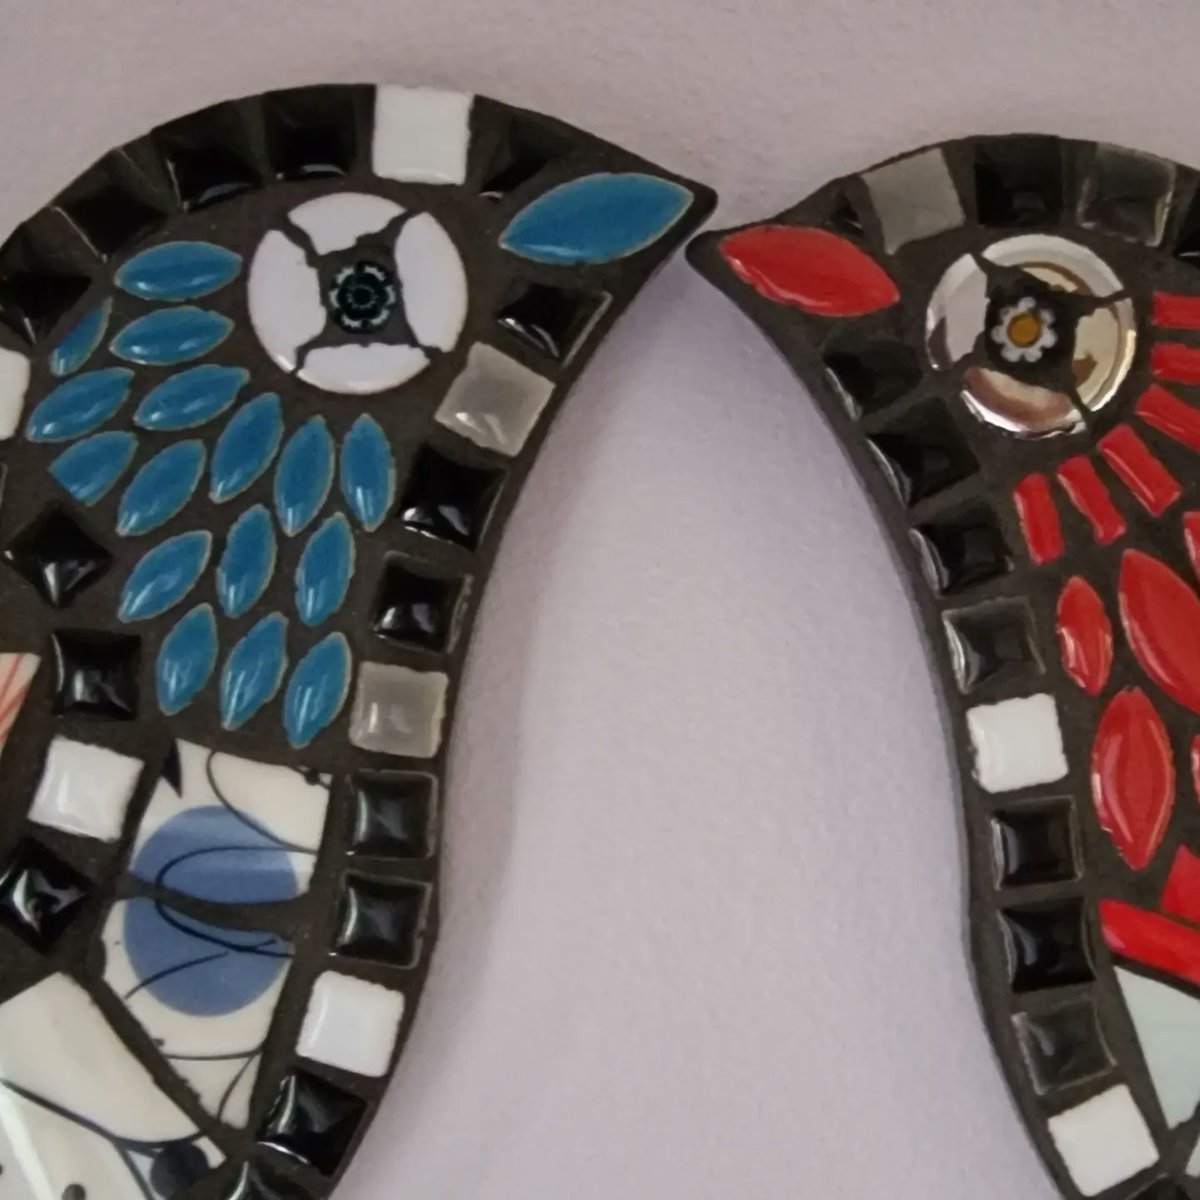 Good evening #WomanInBizHour 
I currently have 2 hanging mosaic birds available in my #folksyshop they would make fab #unique #mothersdaygifts 
folksy.com/shops/monchicm…

#monchicmosaics #MothersDay #shopearly #giftideas 
#sbs #sbswinner #mhhsbd #CraftBizParty